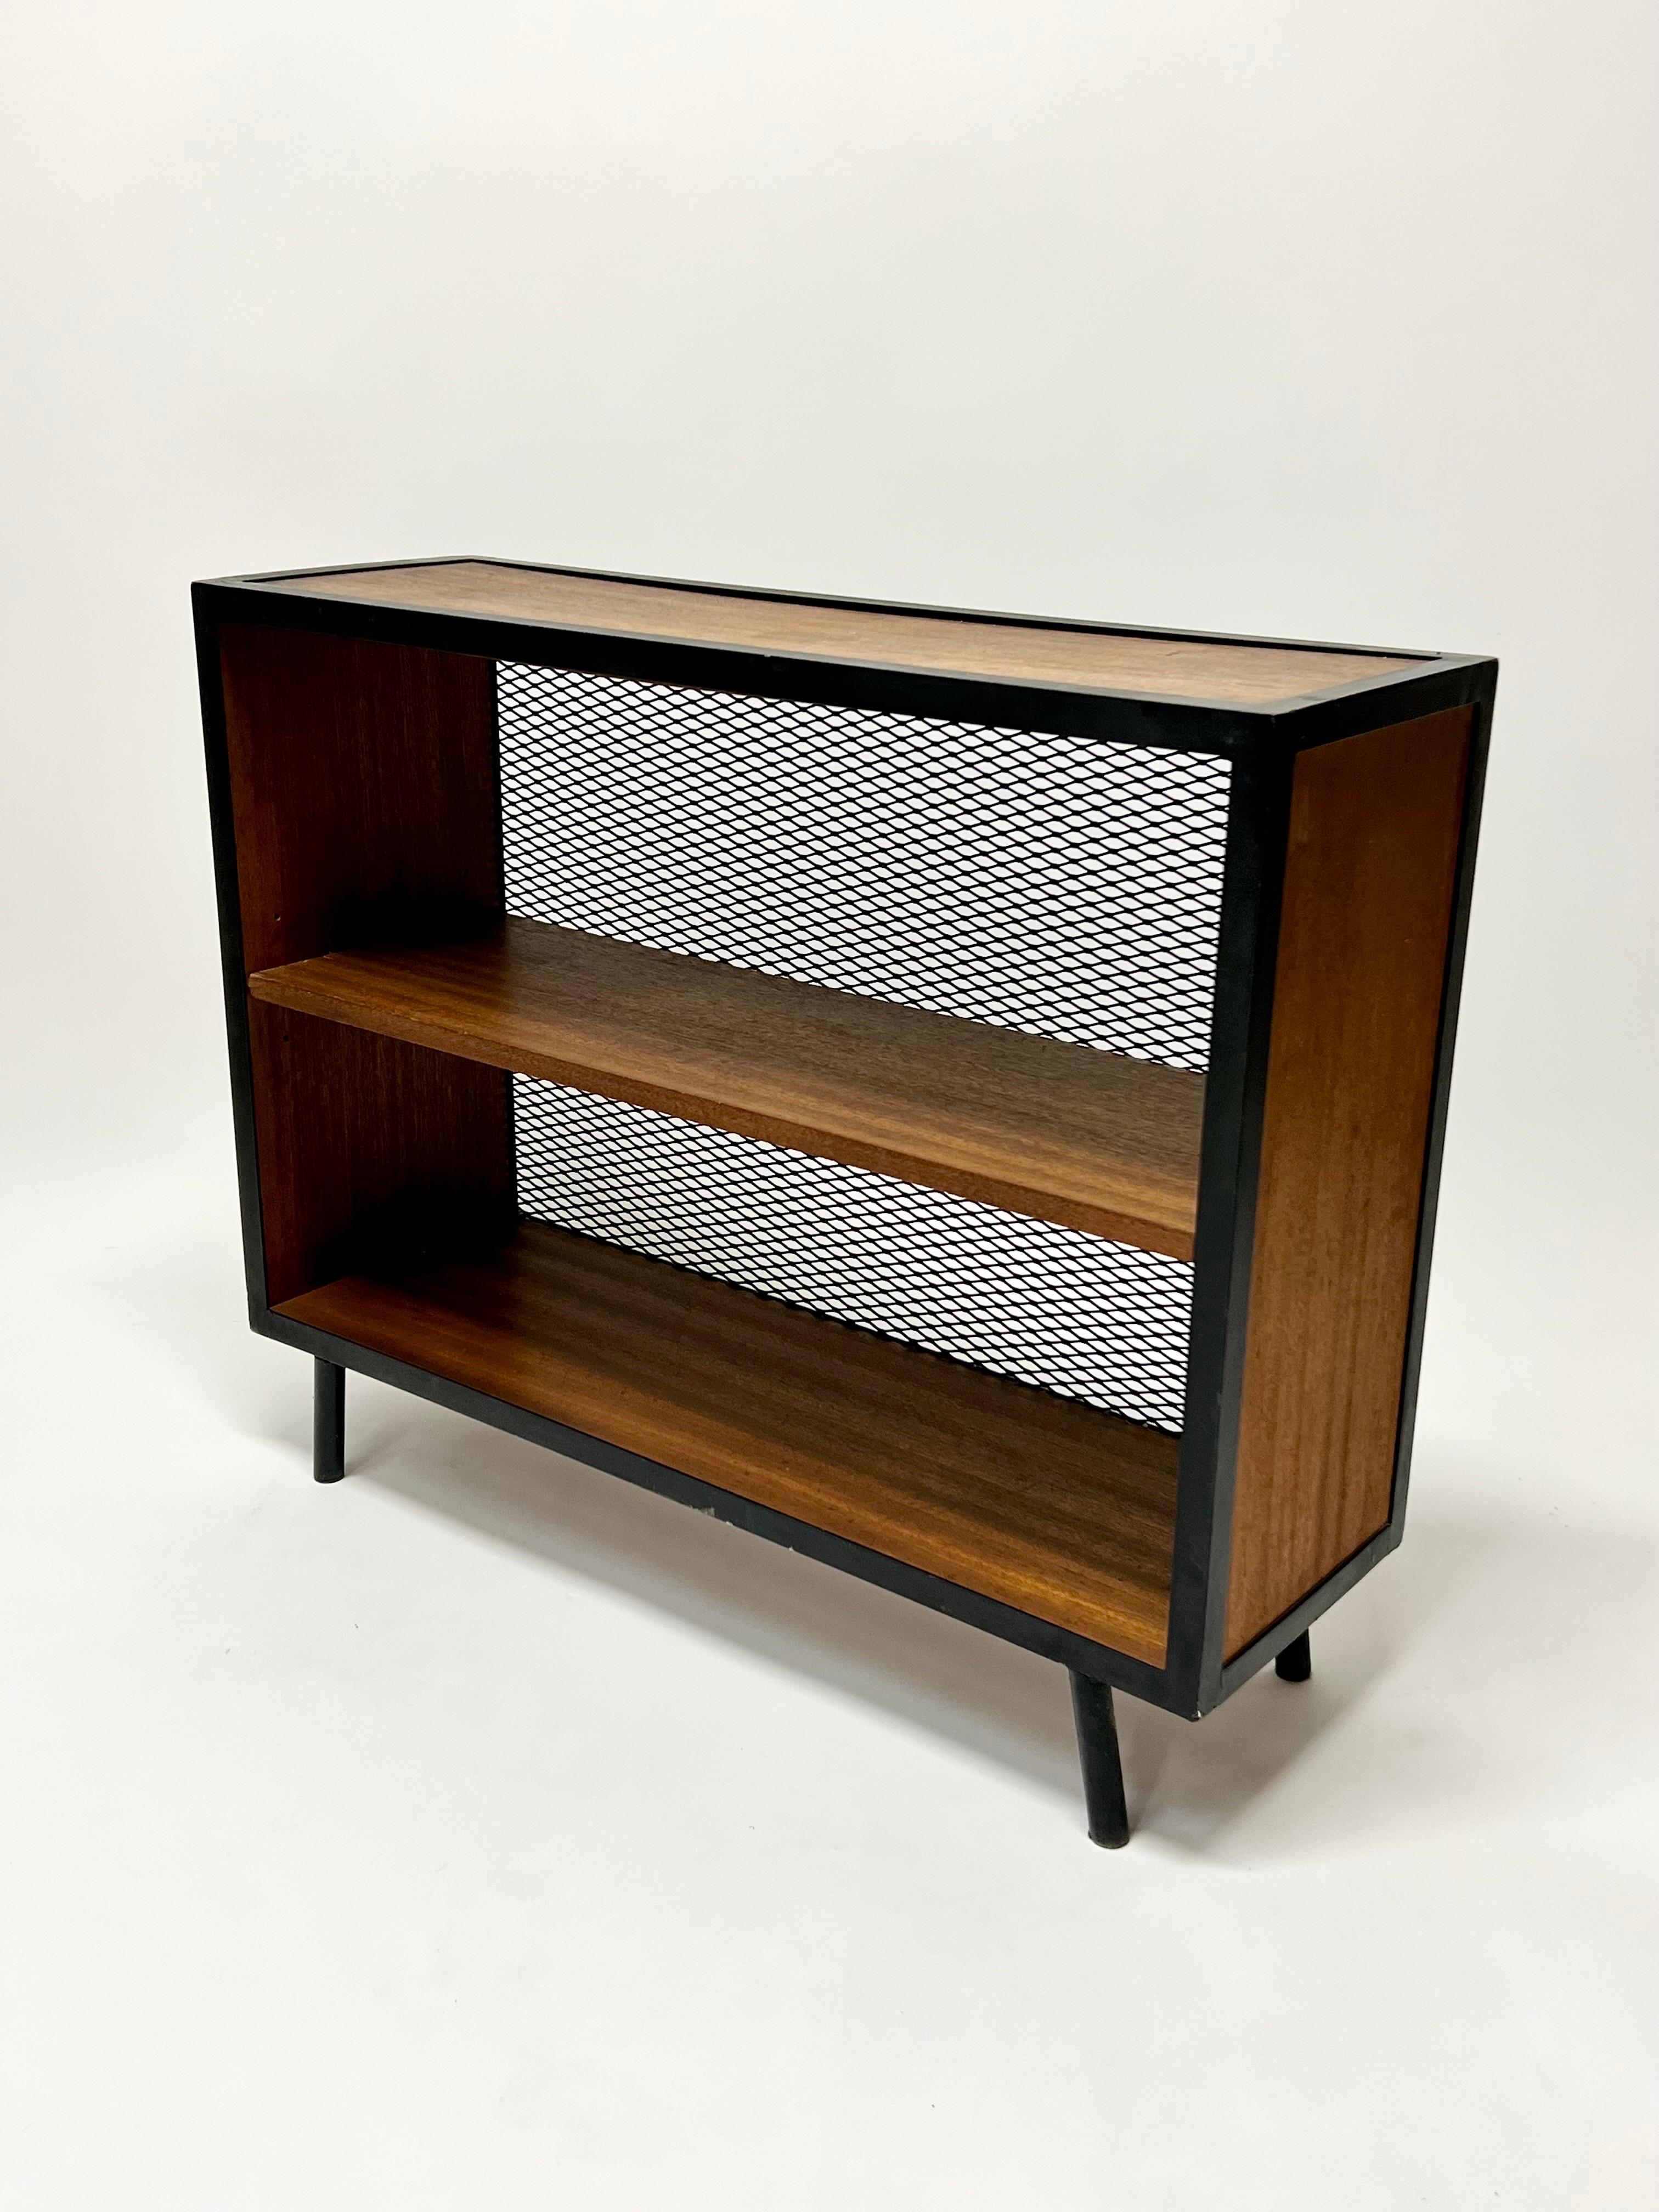 Rare small shelving unit designed by Donald Knorr for Vista of California circa 1950s. Expanded metal backing a heavy gauge iron frame with beautiful mahogany wood. Excellent California modern design.